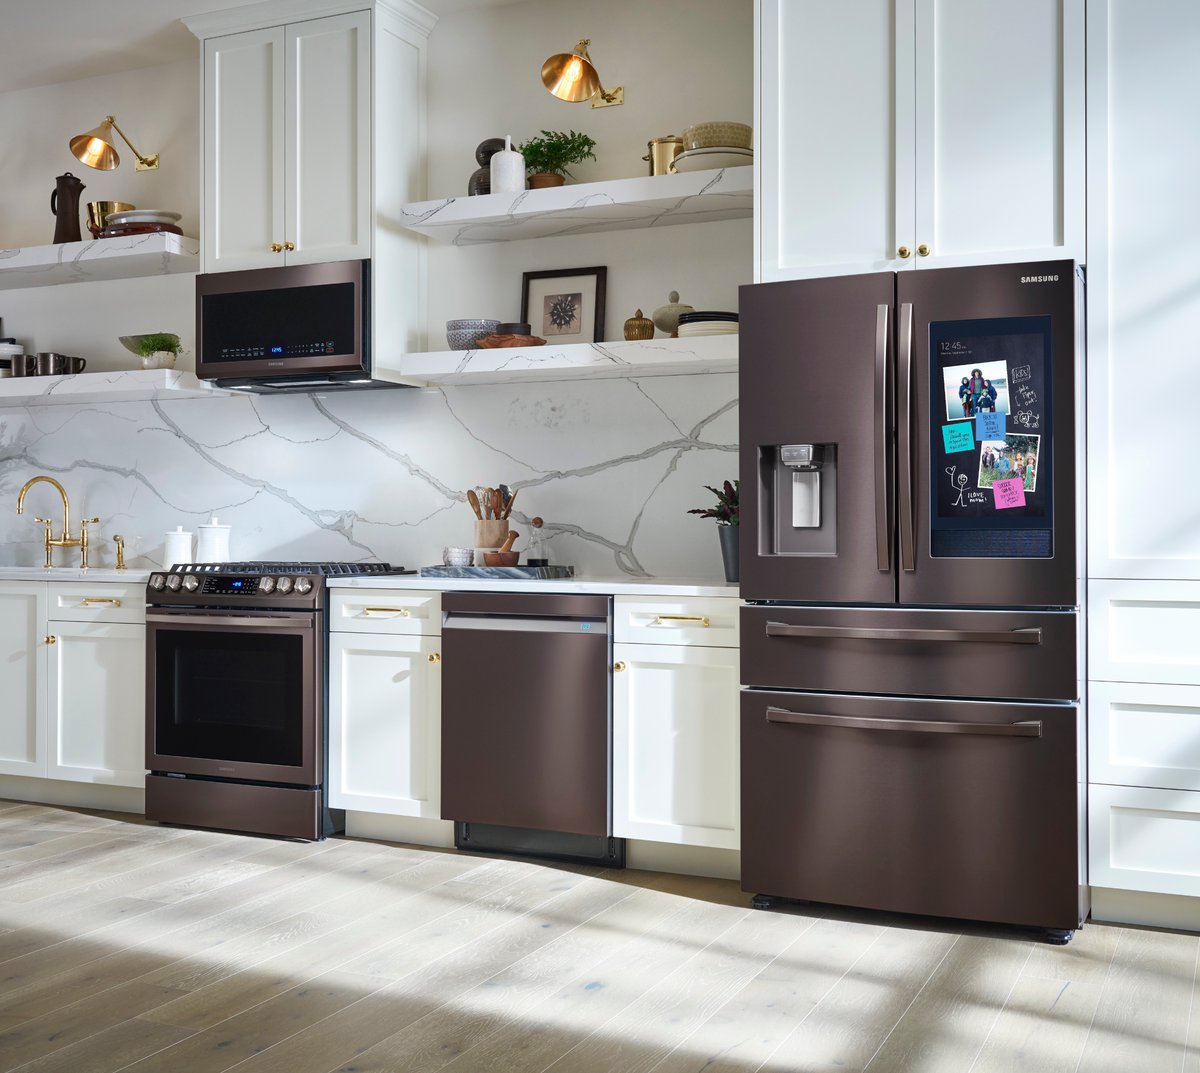 Dream kitchen right there ✨

Samsung 4-door Refrigerator + Gas Range + Linear Wash Dishwasher + Microwave Kitchen Package in Tuscan Stainless

Check it out howl.me/cme1P6RY2eI

#SamsungPartner #affiliate